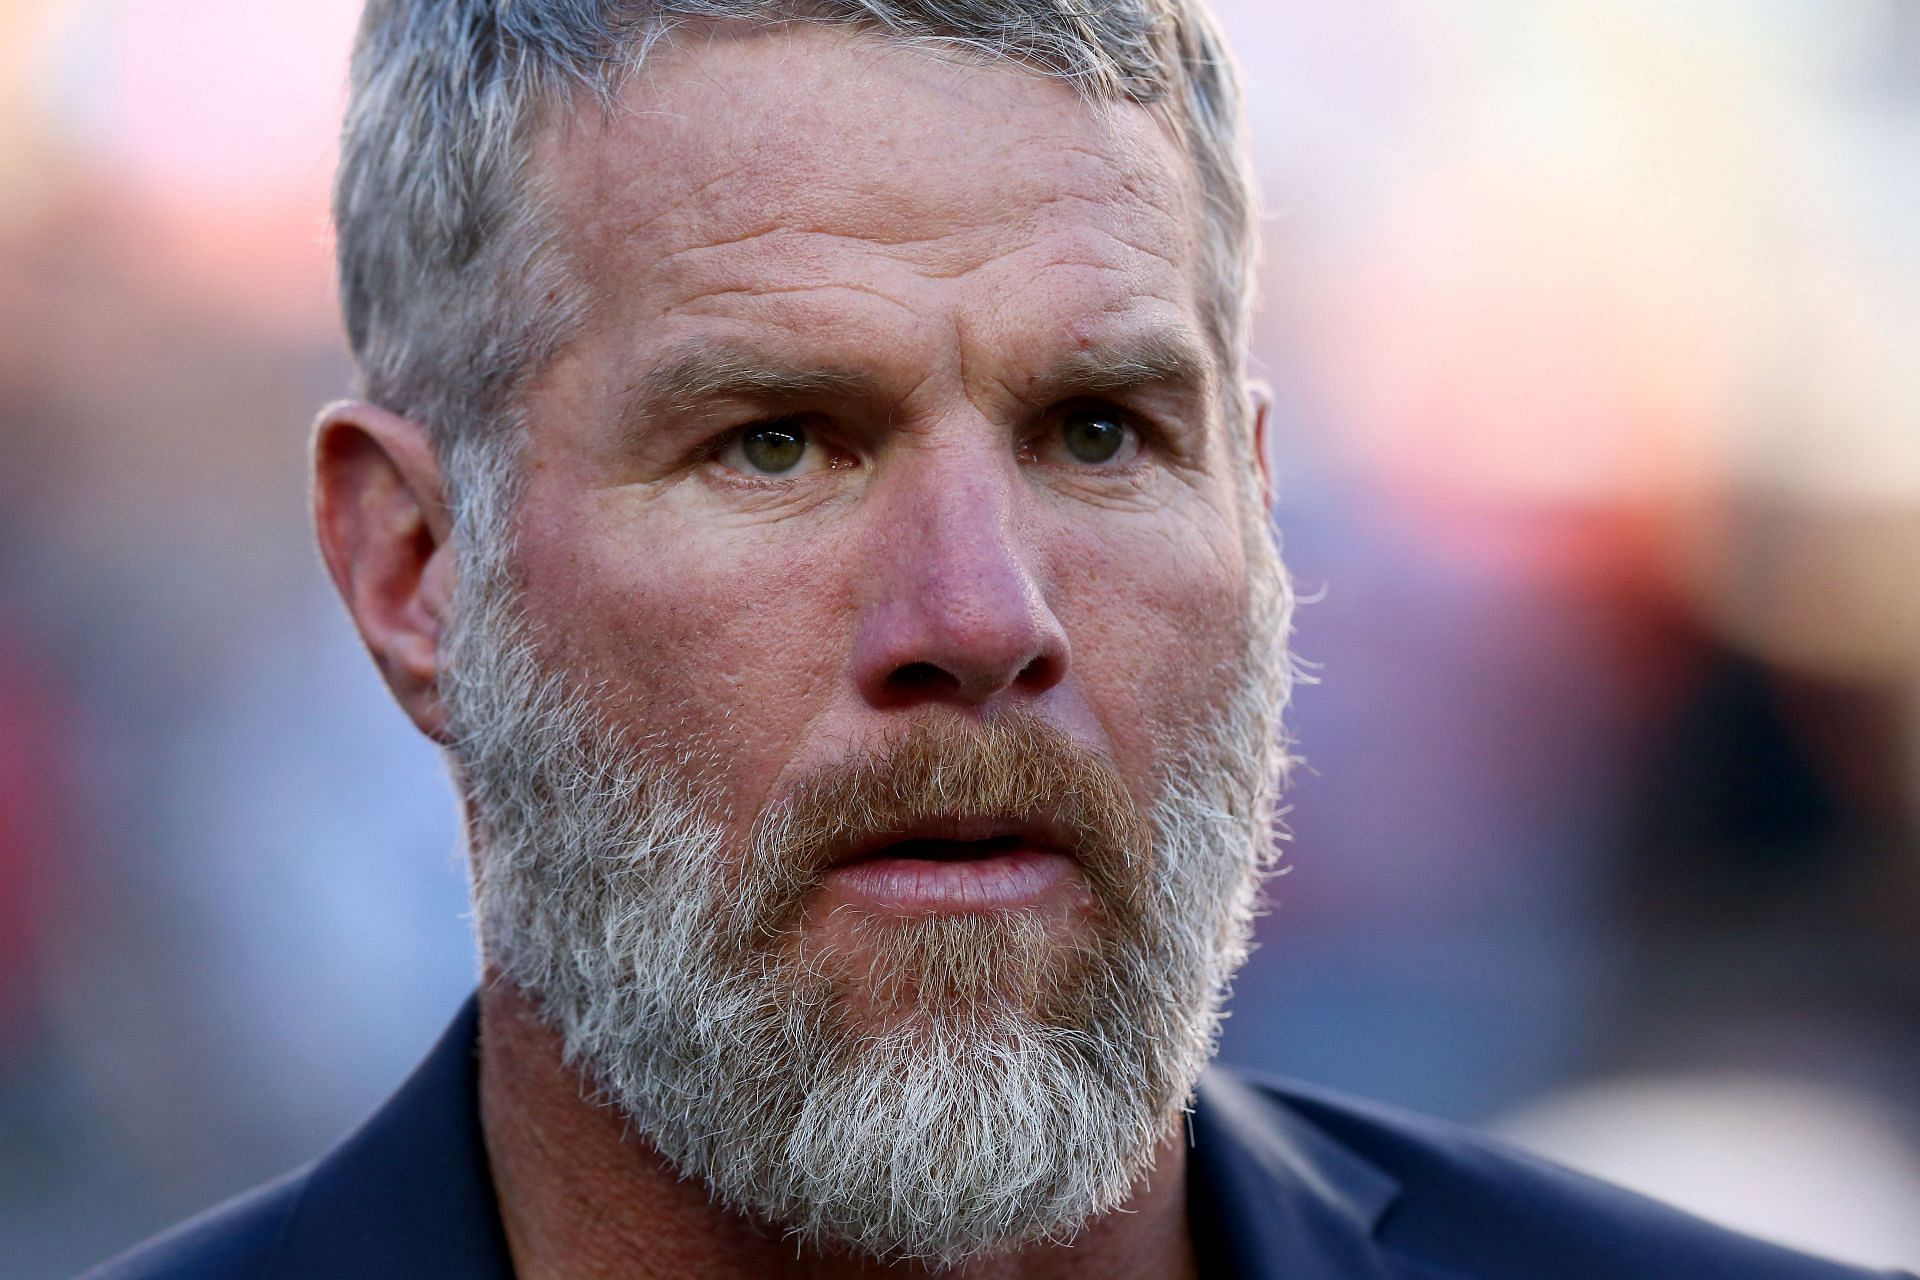 Stealing from a welfare fund has ruined Brett Favre&#039;s image